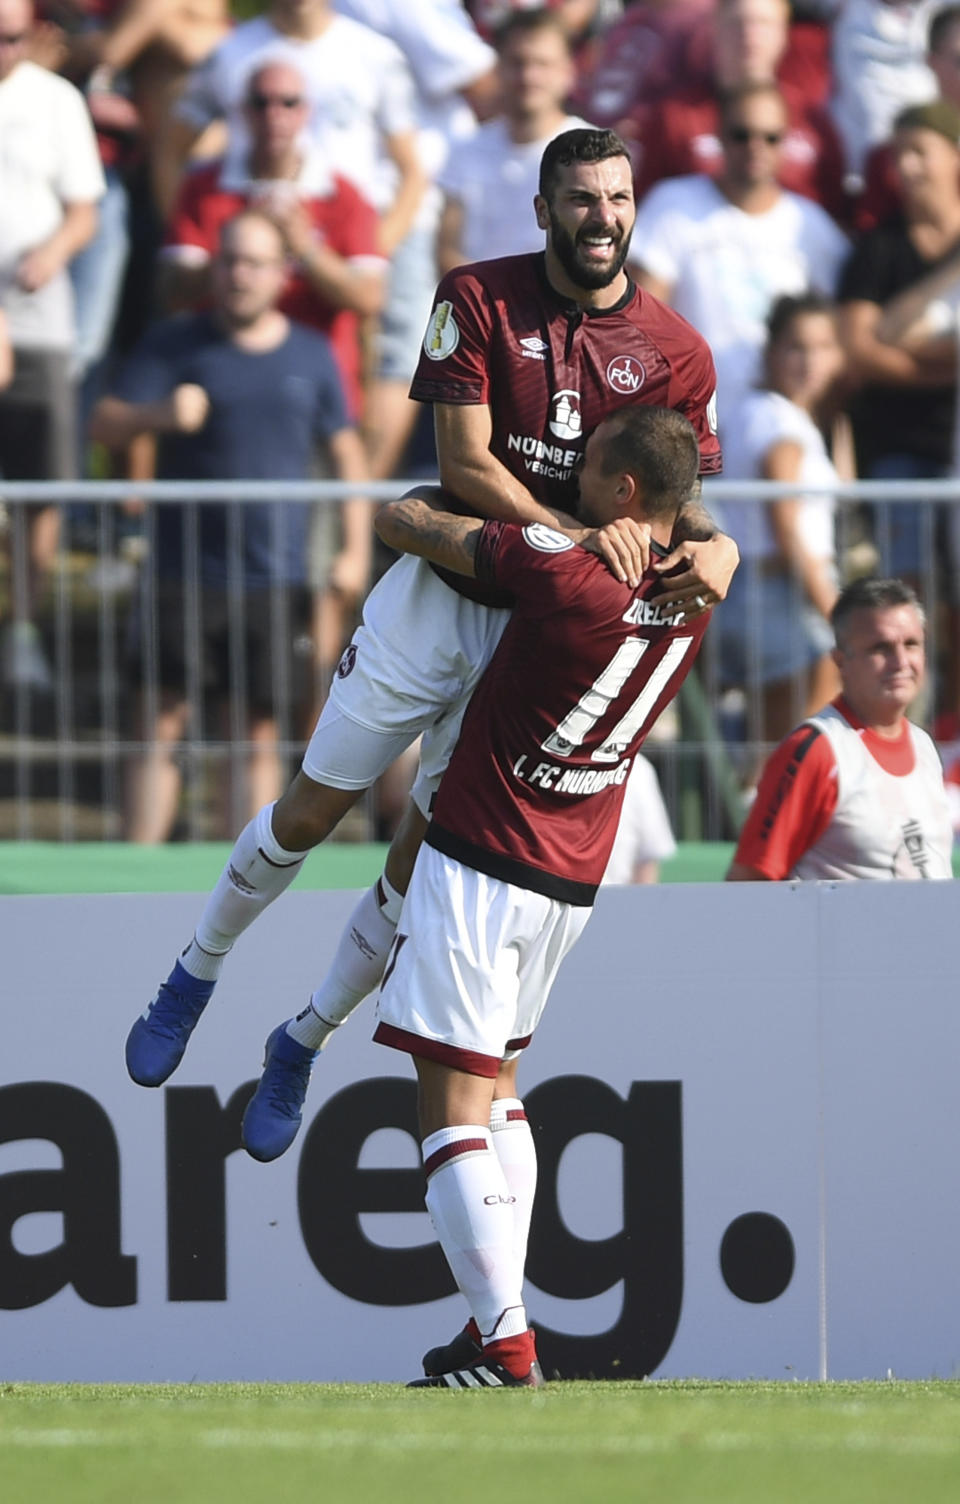 File - In this Saturday, Aug. 18, 2018 photo Nuremberg's Mikael Ishak, left, and his teammate Adam Zrelak, right, celebrate during a German soccer cup match against SV Linx in Kehl, Germany. (Patrick Seeger/dpa via AP, file)